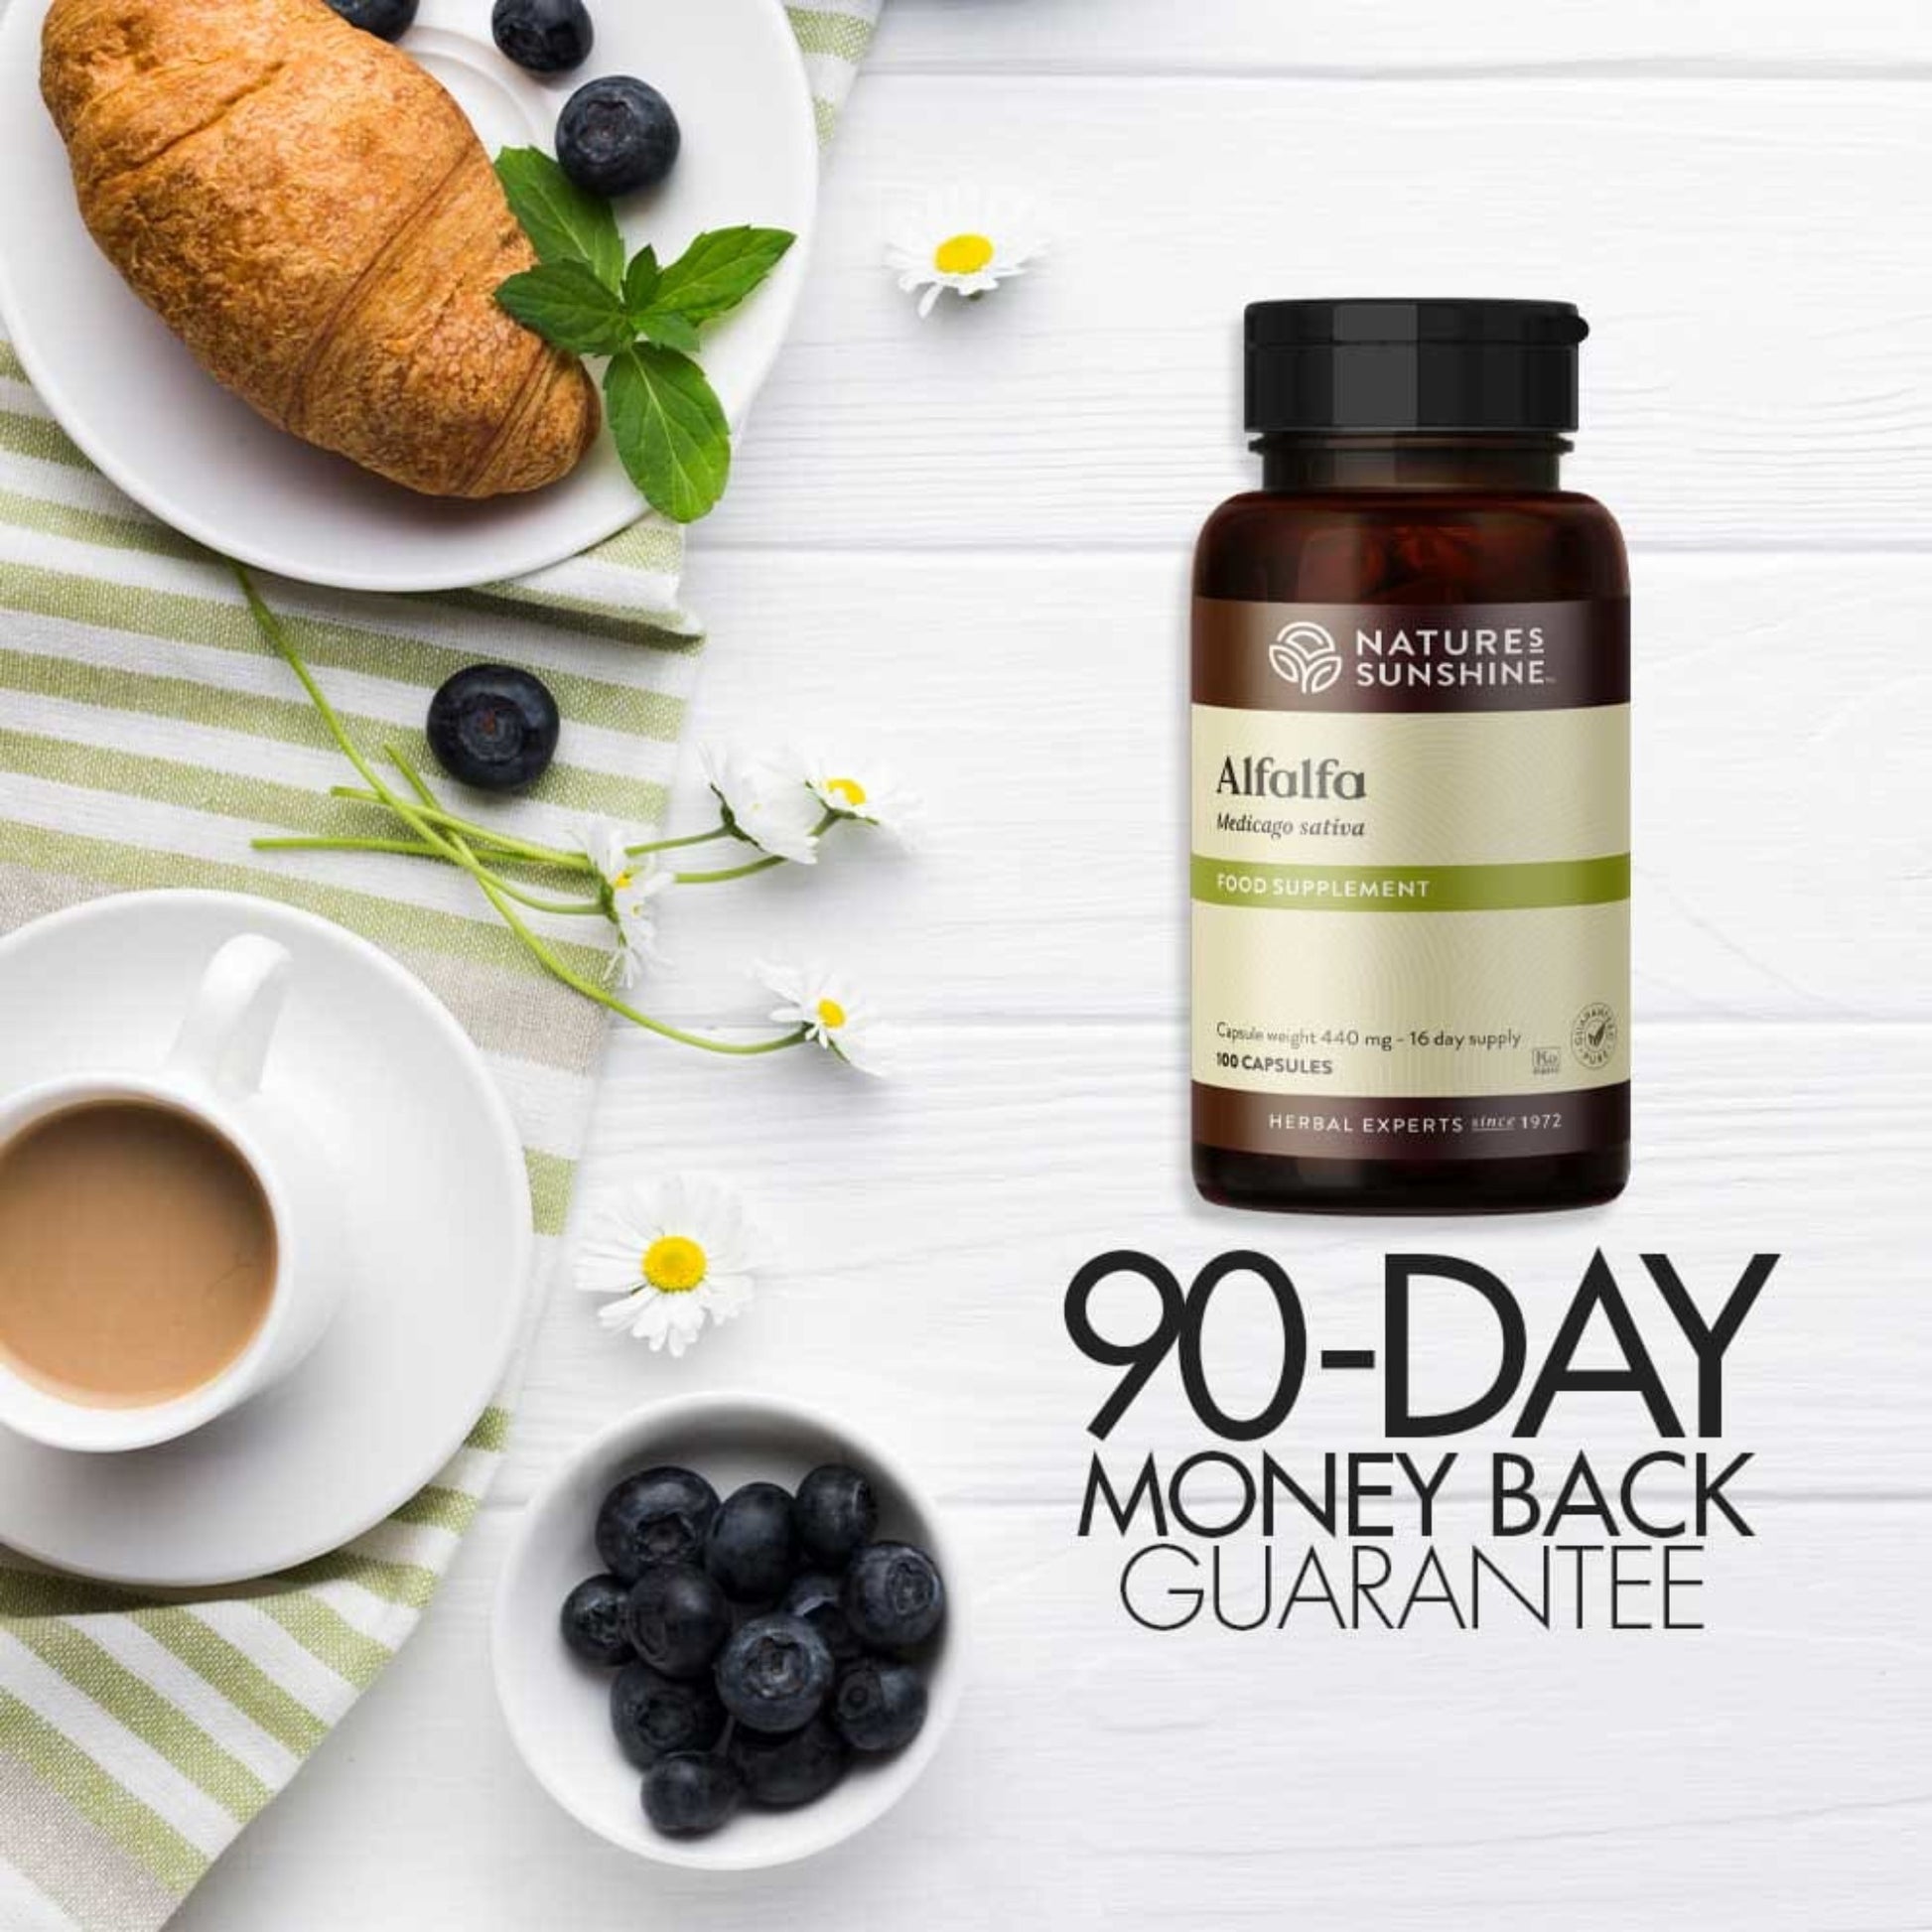 Nature’s Sunshine Alfalfa comes with a 90-day money back guarantee